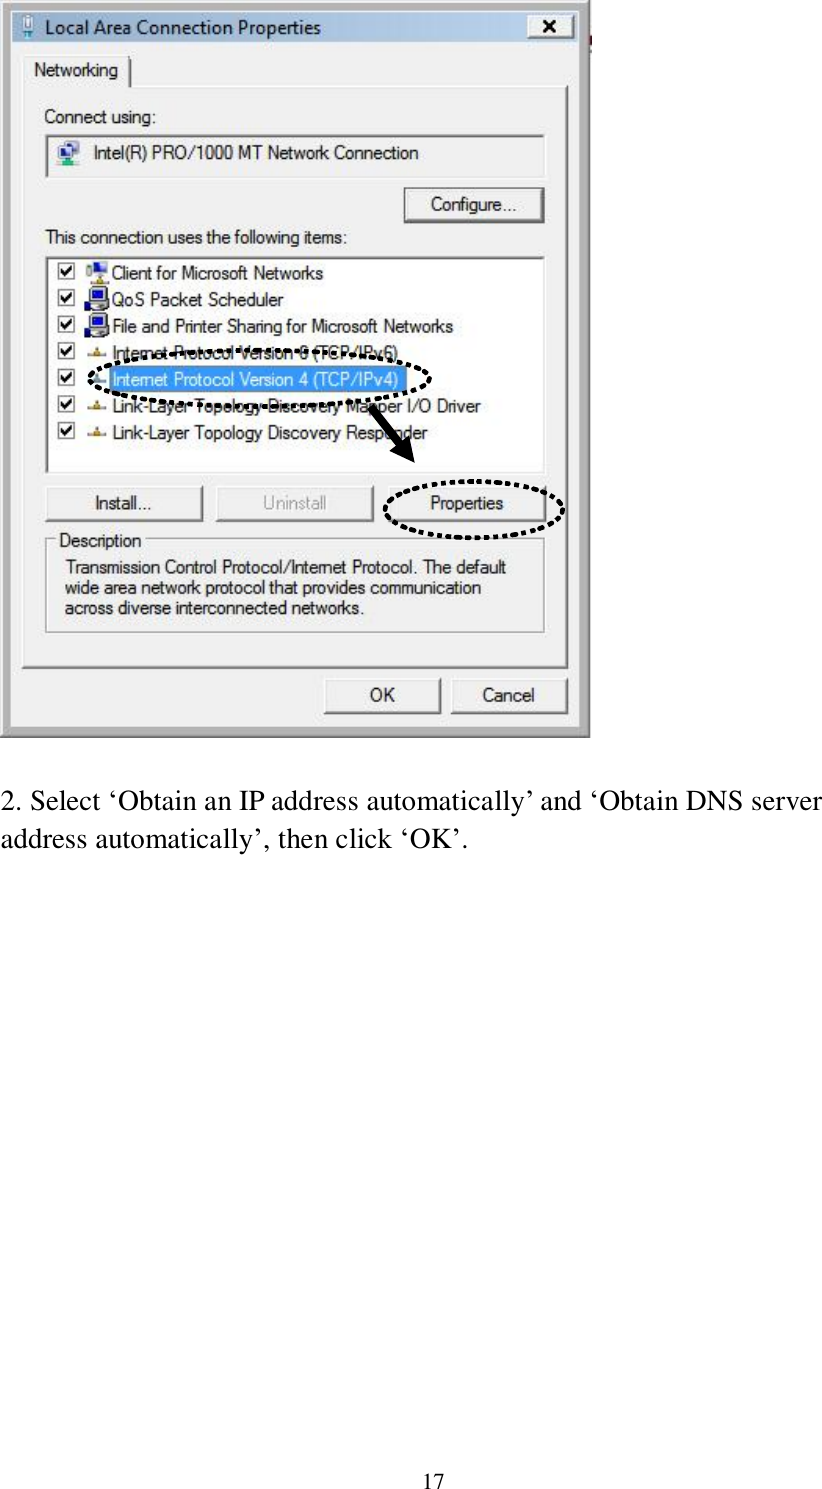 17   2. Select „Obtain an IP address automatically‟ and „Obtain DNS server address automatically‟, then click „OK‟.  